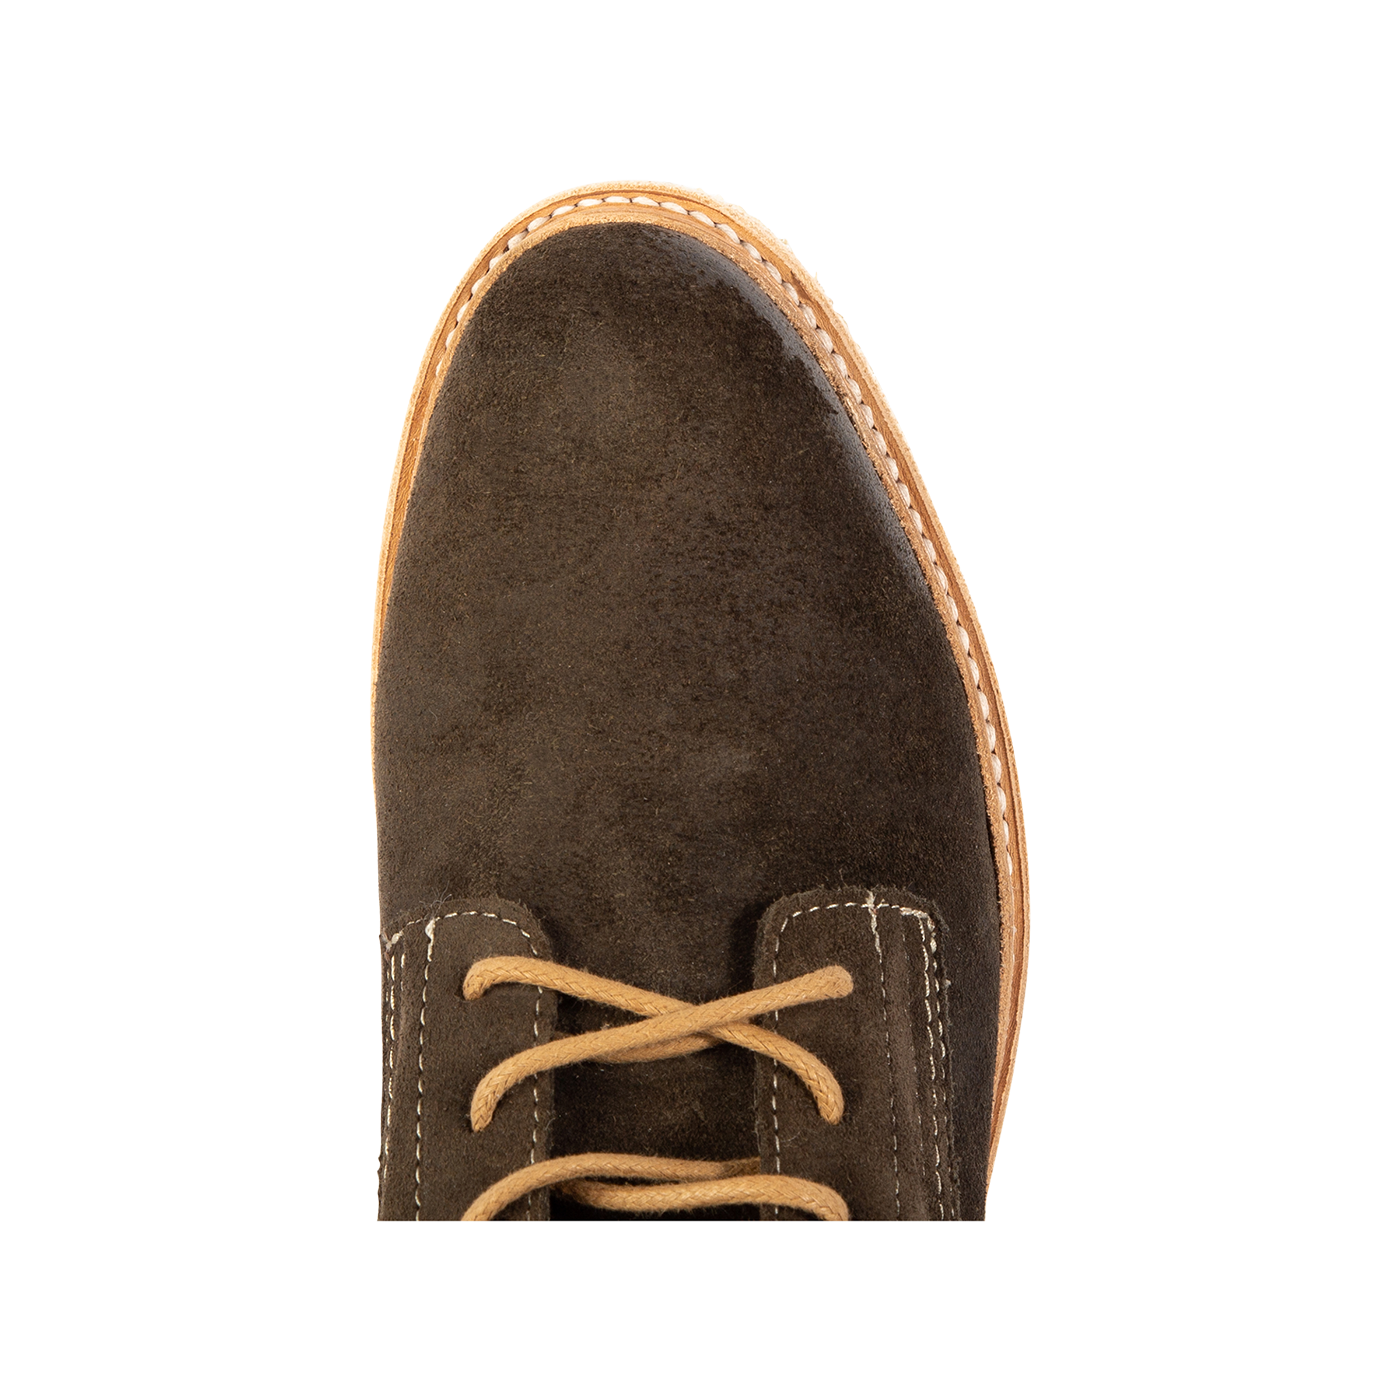 Top view showing almond toe and suede upper on FREEBIRD men's Wheeler olive suede shoe